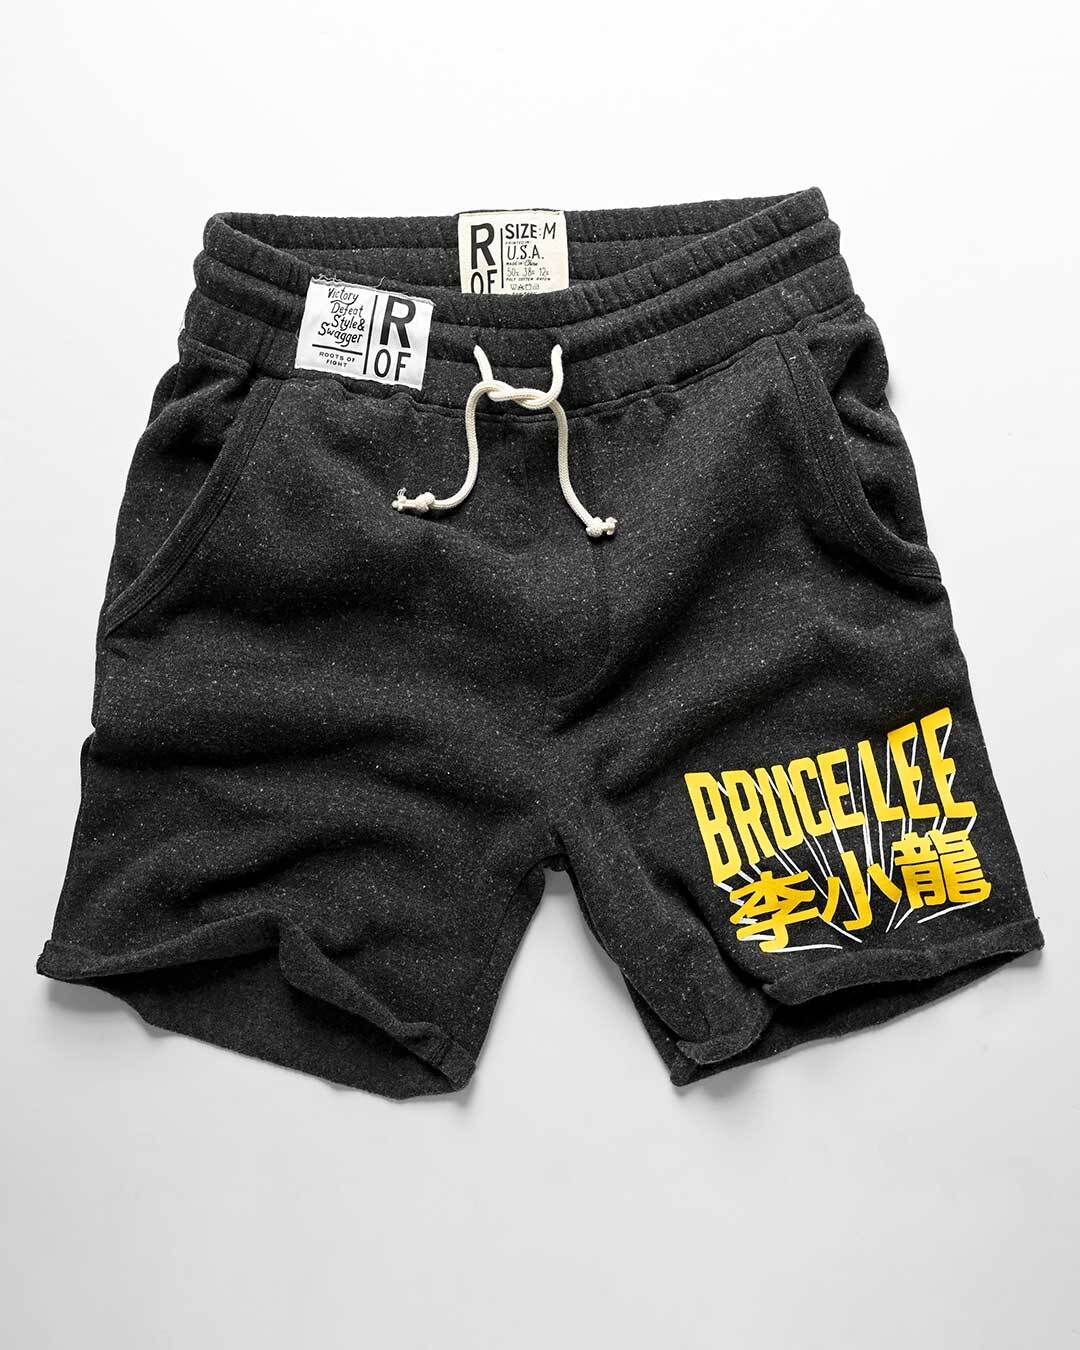 Bruce Lee Classic Black Shorts - Roots of Fight